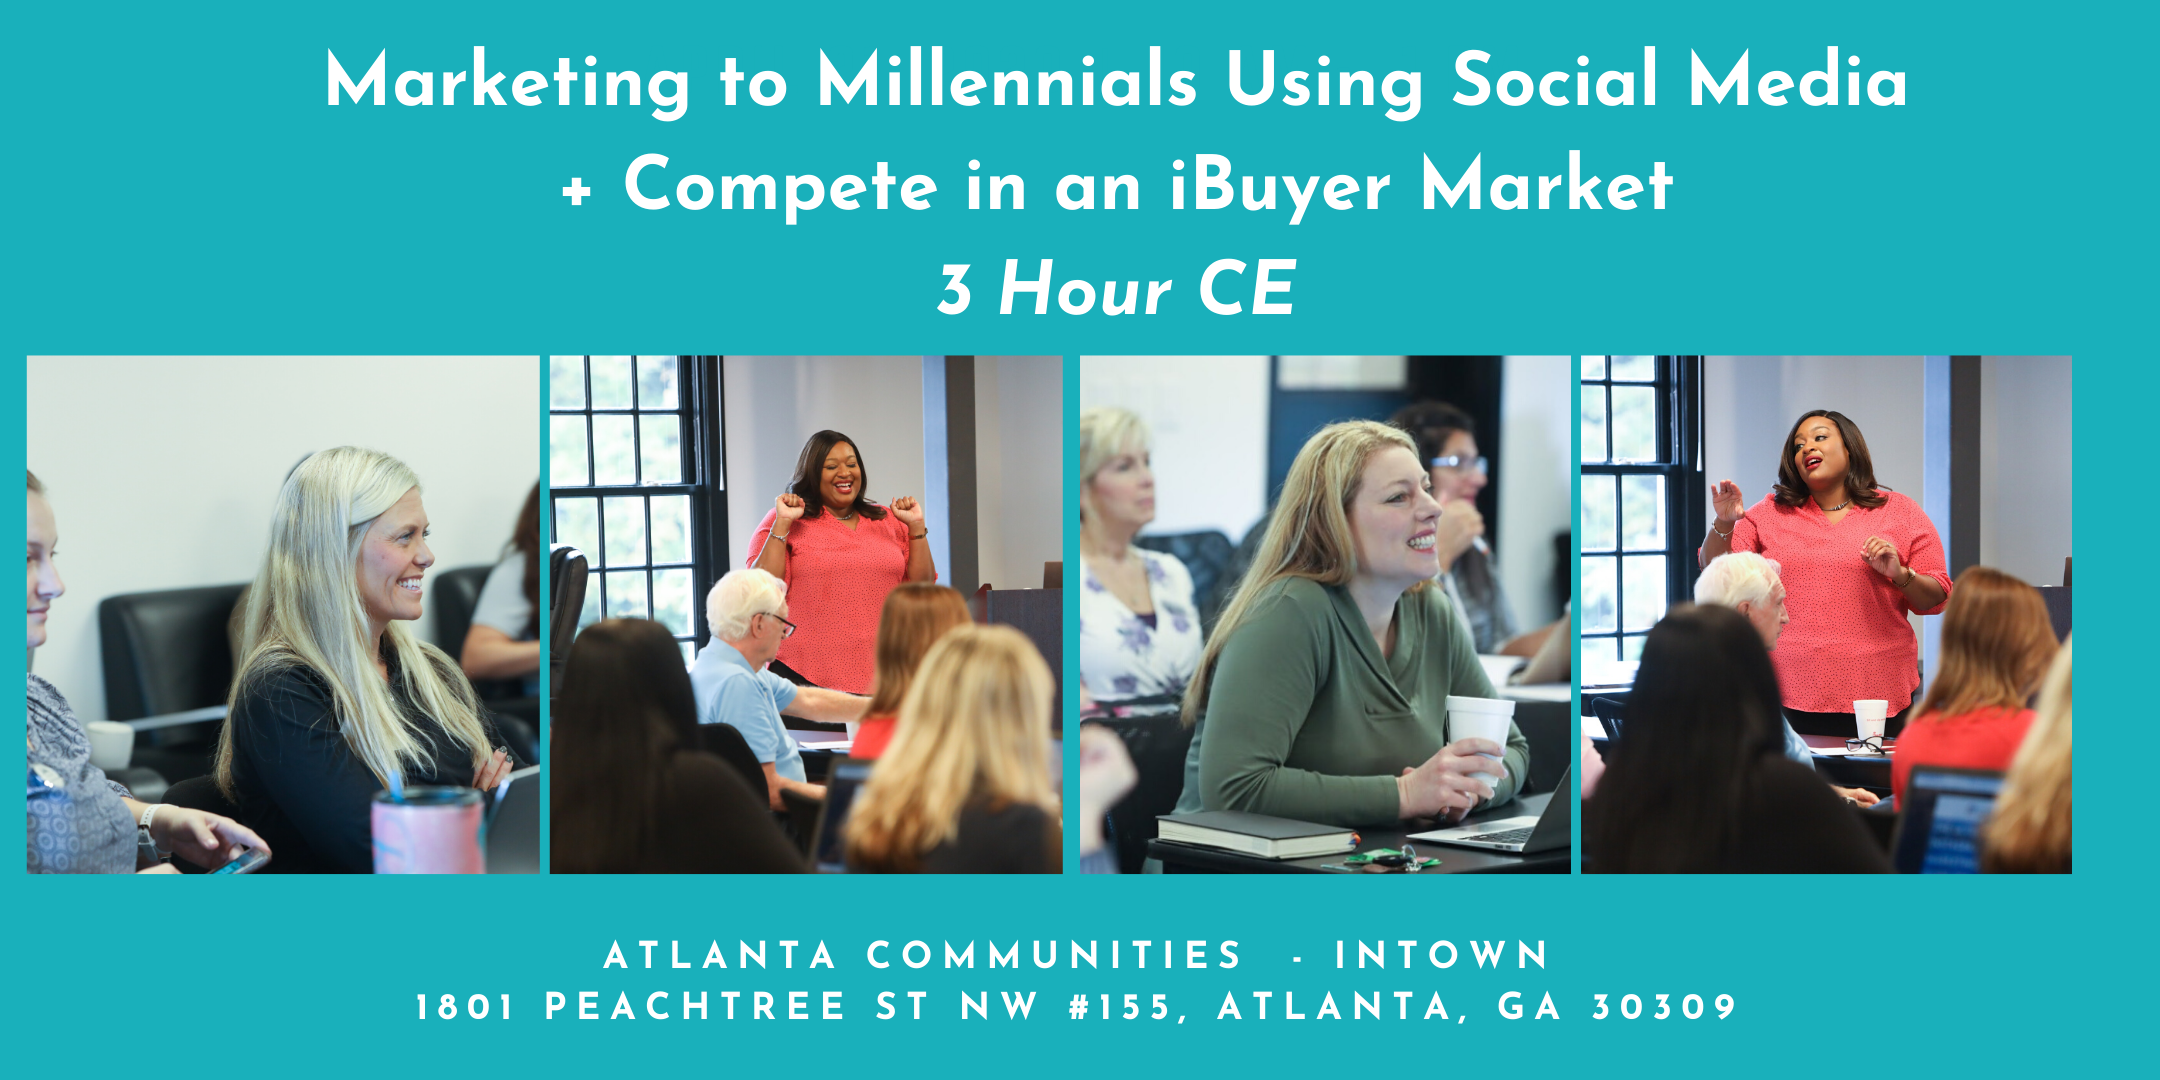 (3 Hour CE) Marketing to Millennials Using Social Media + Compete in an iBuyer Market